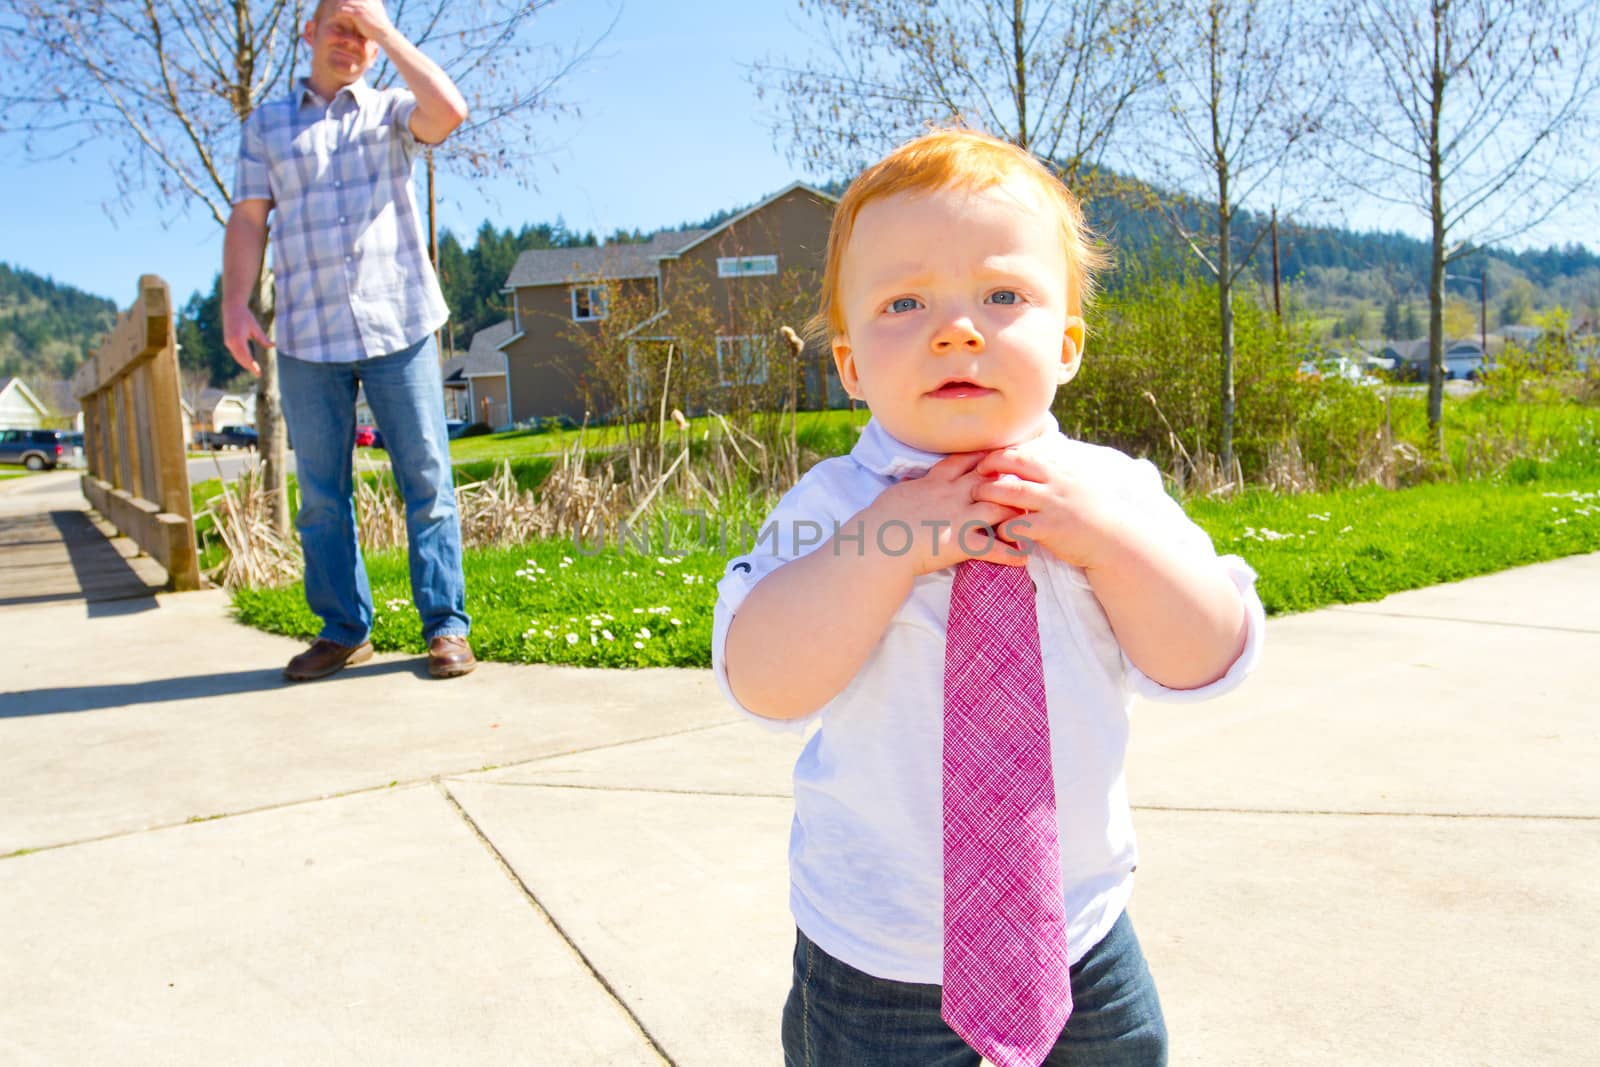 A father is holding his hand to his head in the background of this image while the young boy has his hands to his necktie.